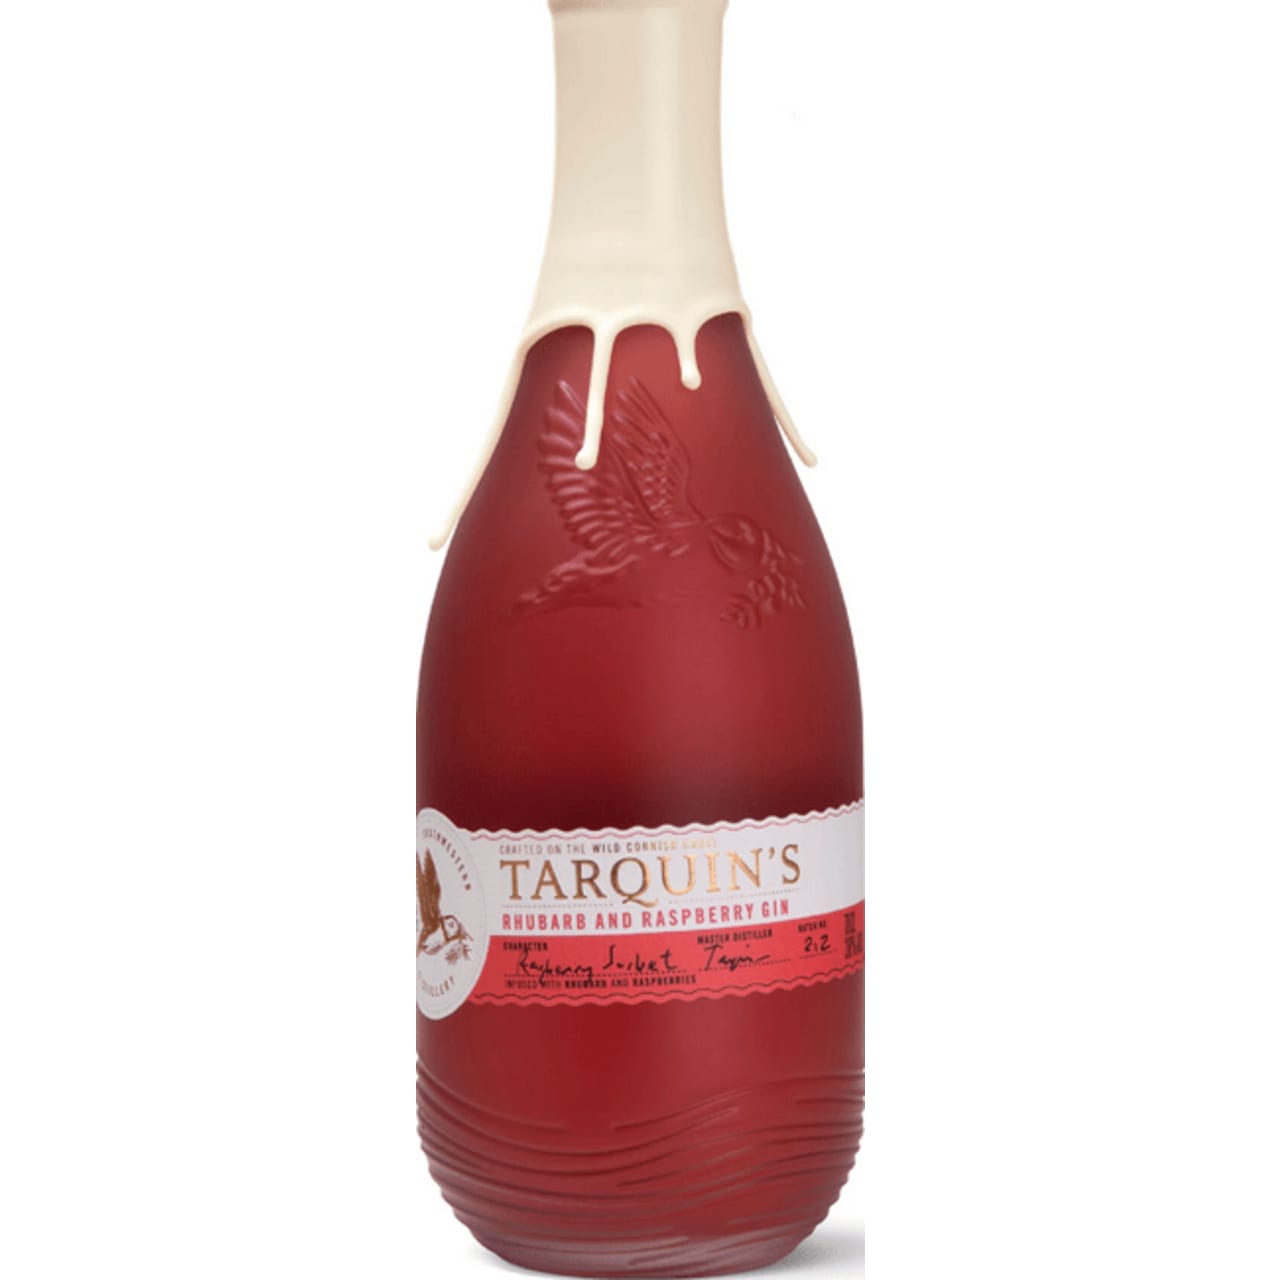 Tarquin's Rhubarb and Raspberry Gin is lovingly infused with the most delicious fresh pressed rhubarb and raspberries to give this special gin its beautiful blush.